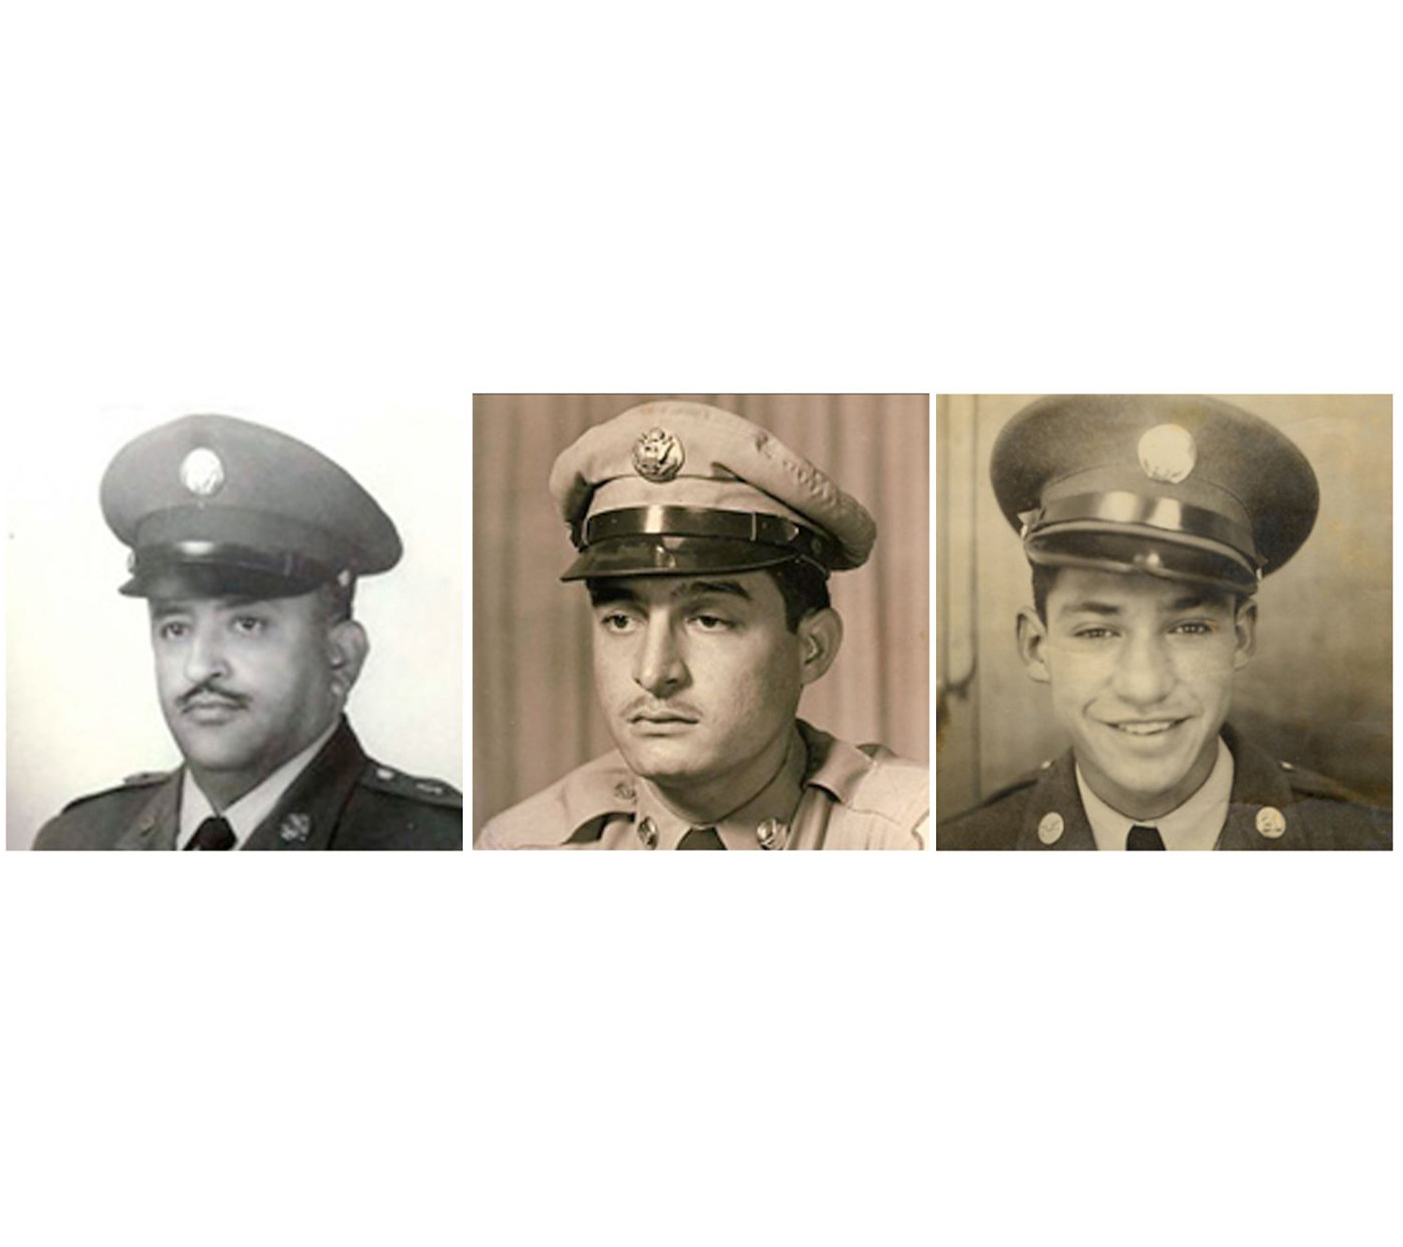 These images provided by the U.S. Army show Korean War veterans, from left, Sgt. 1st Class Eduardo Corral Gomez, Master Sgt. Juan E. Negron and Master Sgt. Mike C. Pena, who are among 24 minority veterans receiving the Medal of Honor. (U.S. Army&mdash;ap)